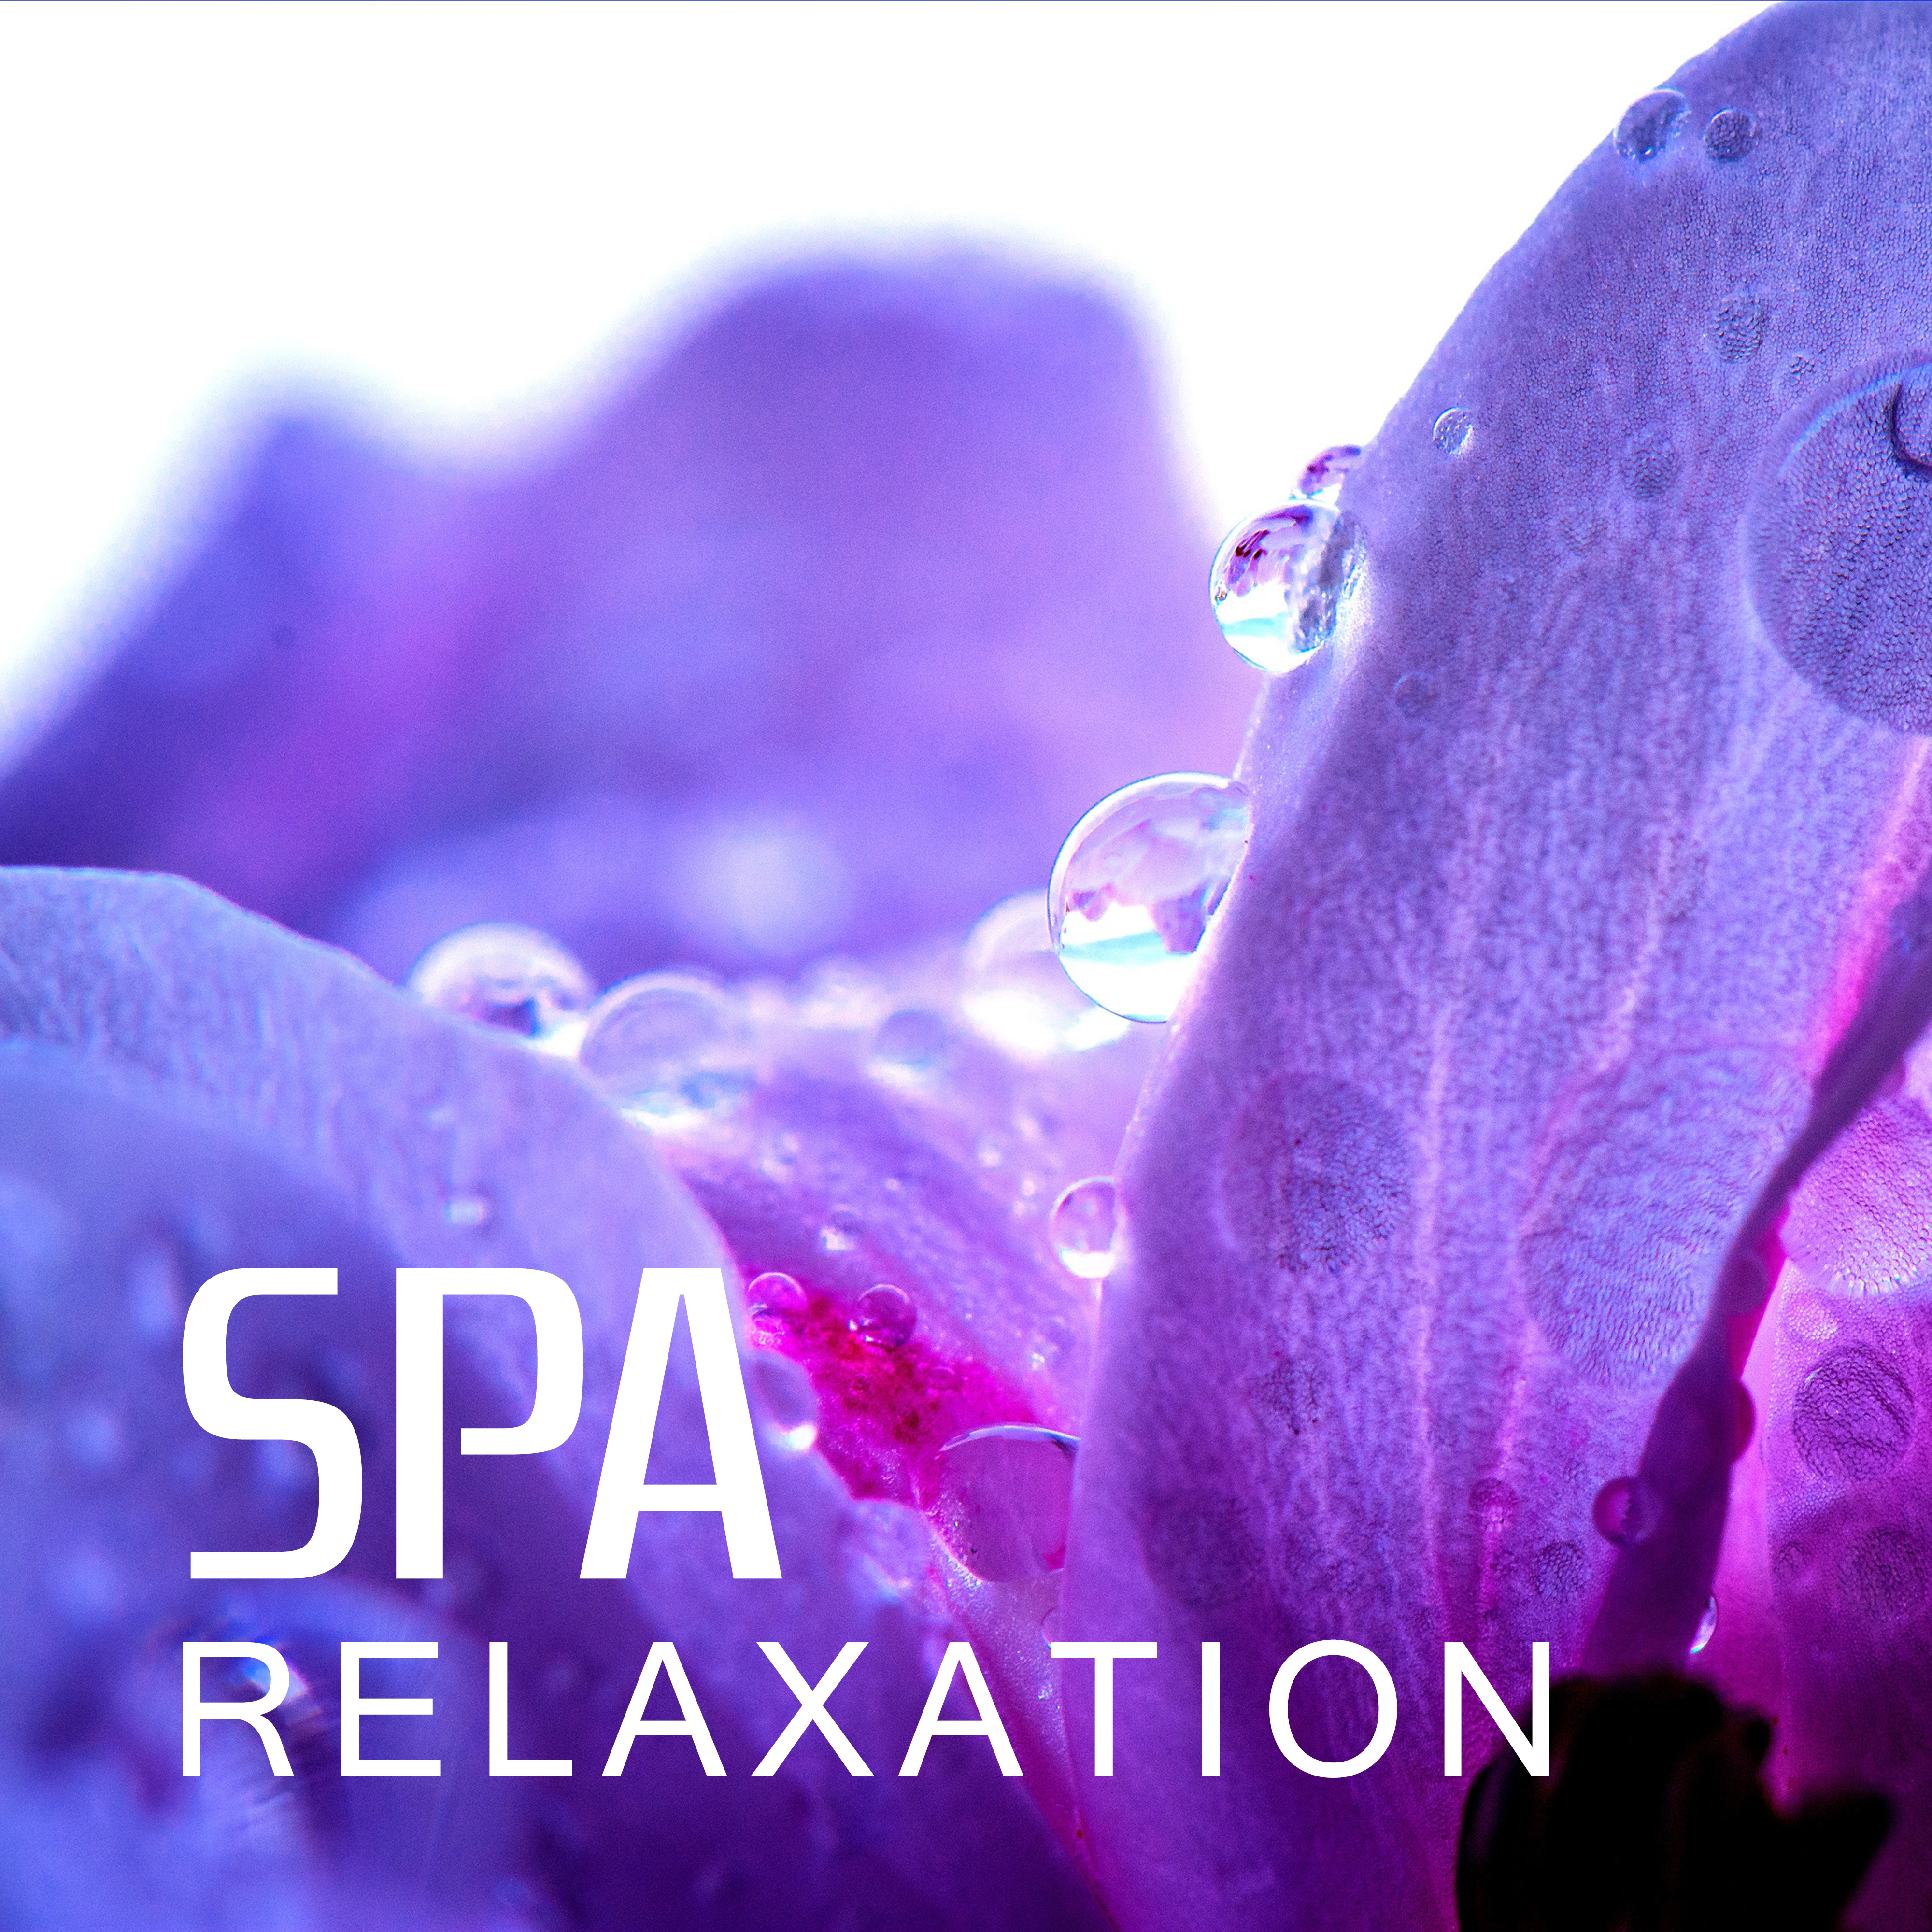 Spa Relaxation -  Relaxing Music for Massage, Spa, Deep Massage, Relaxing Music Therapy, Sounds of Nature, Reiki, Zen